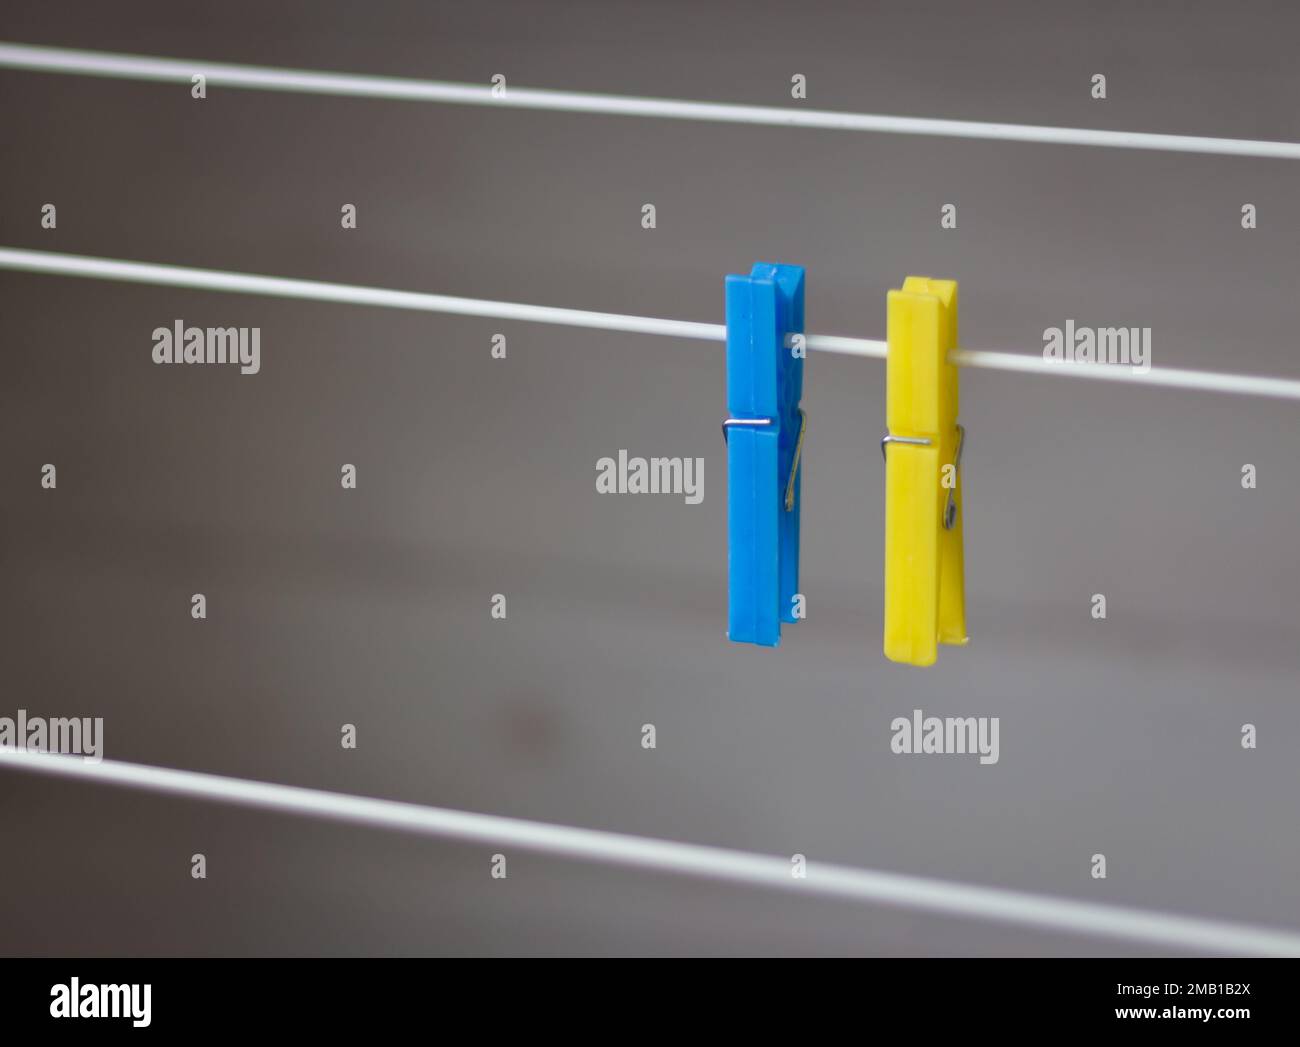 Clothing peg on washing line. Clothing pins on clothesline. Clothes pin in ukrainian colors. Blue and yellow peg. Laundry concept. Household equipment Stock Photo